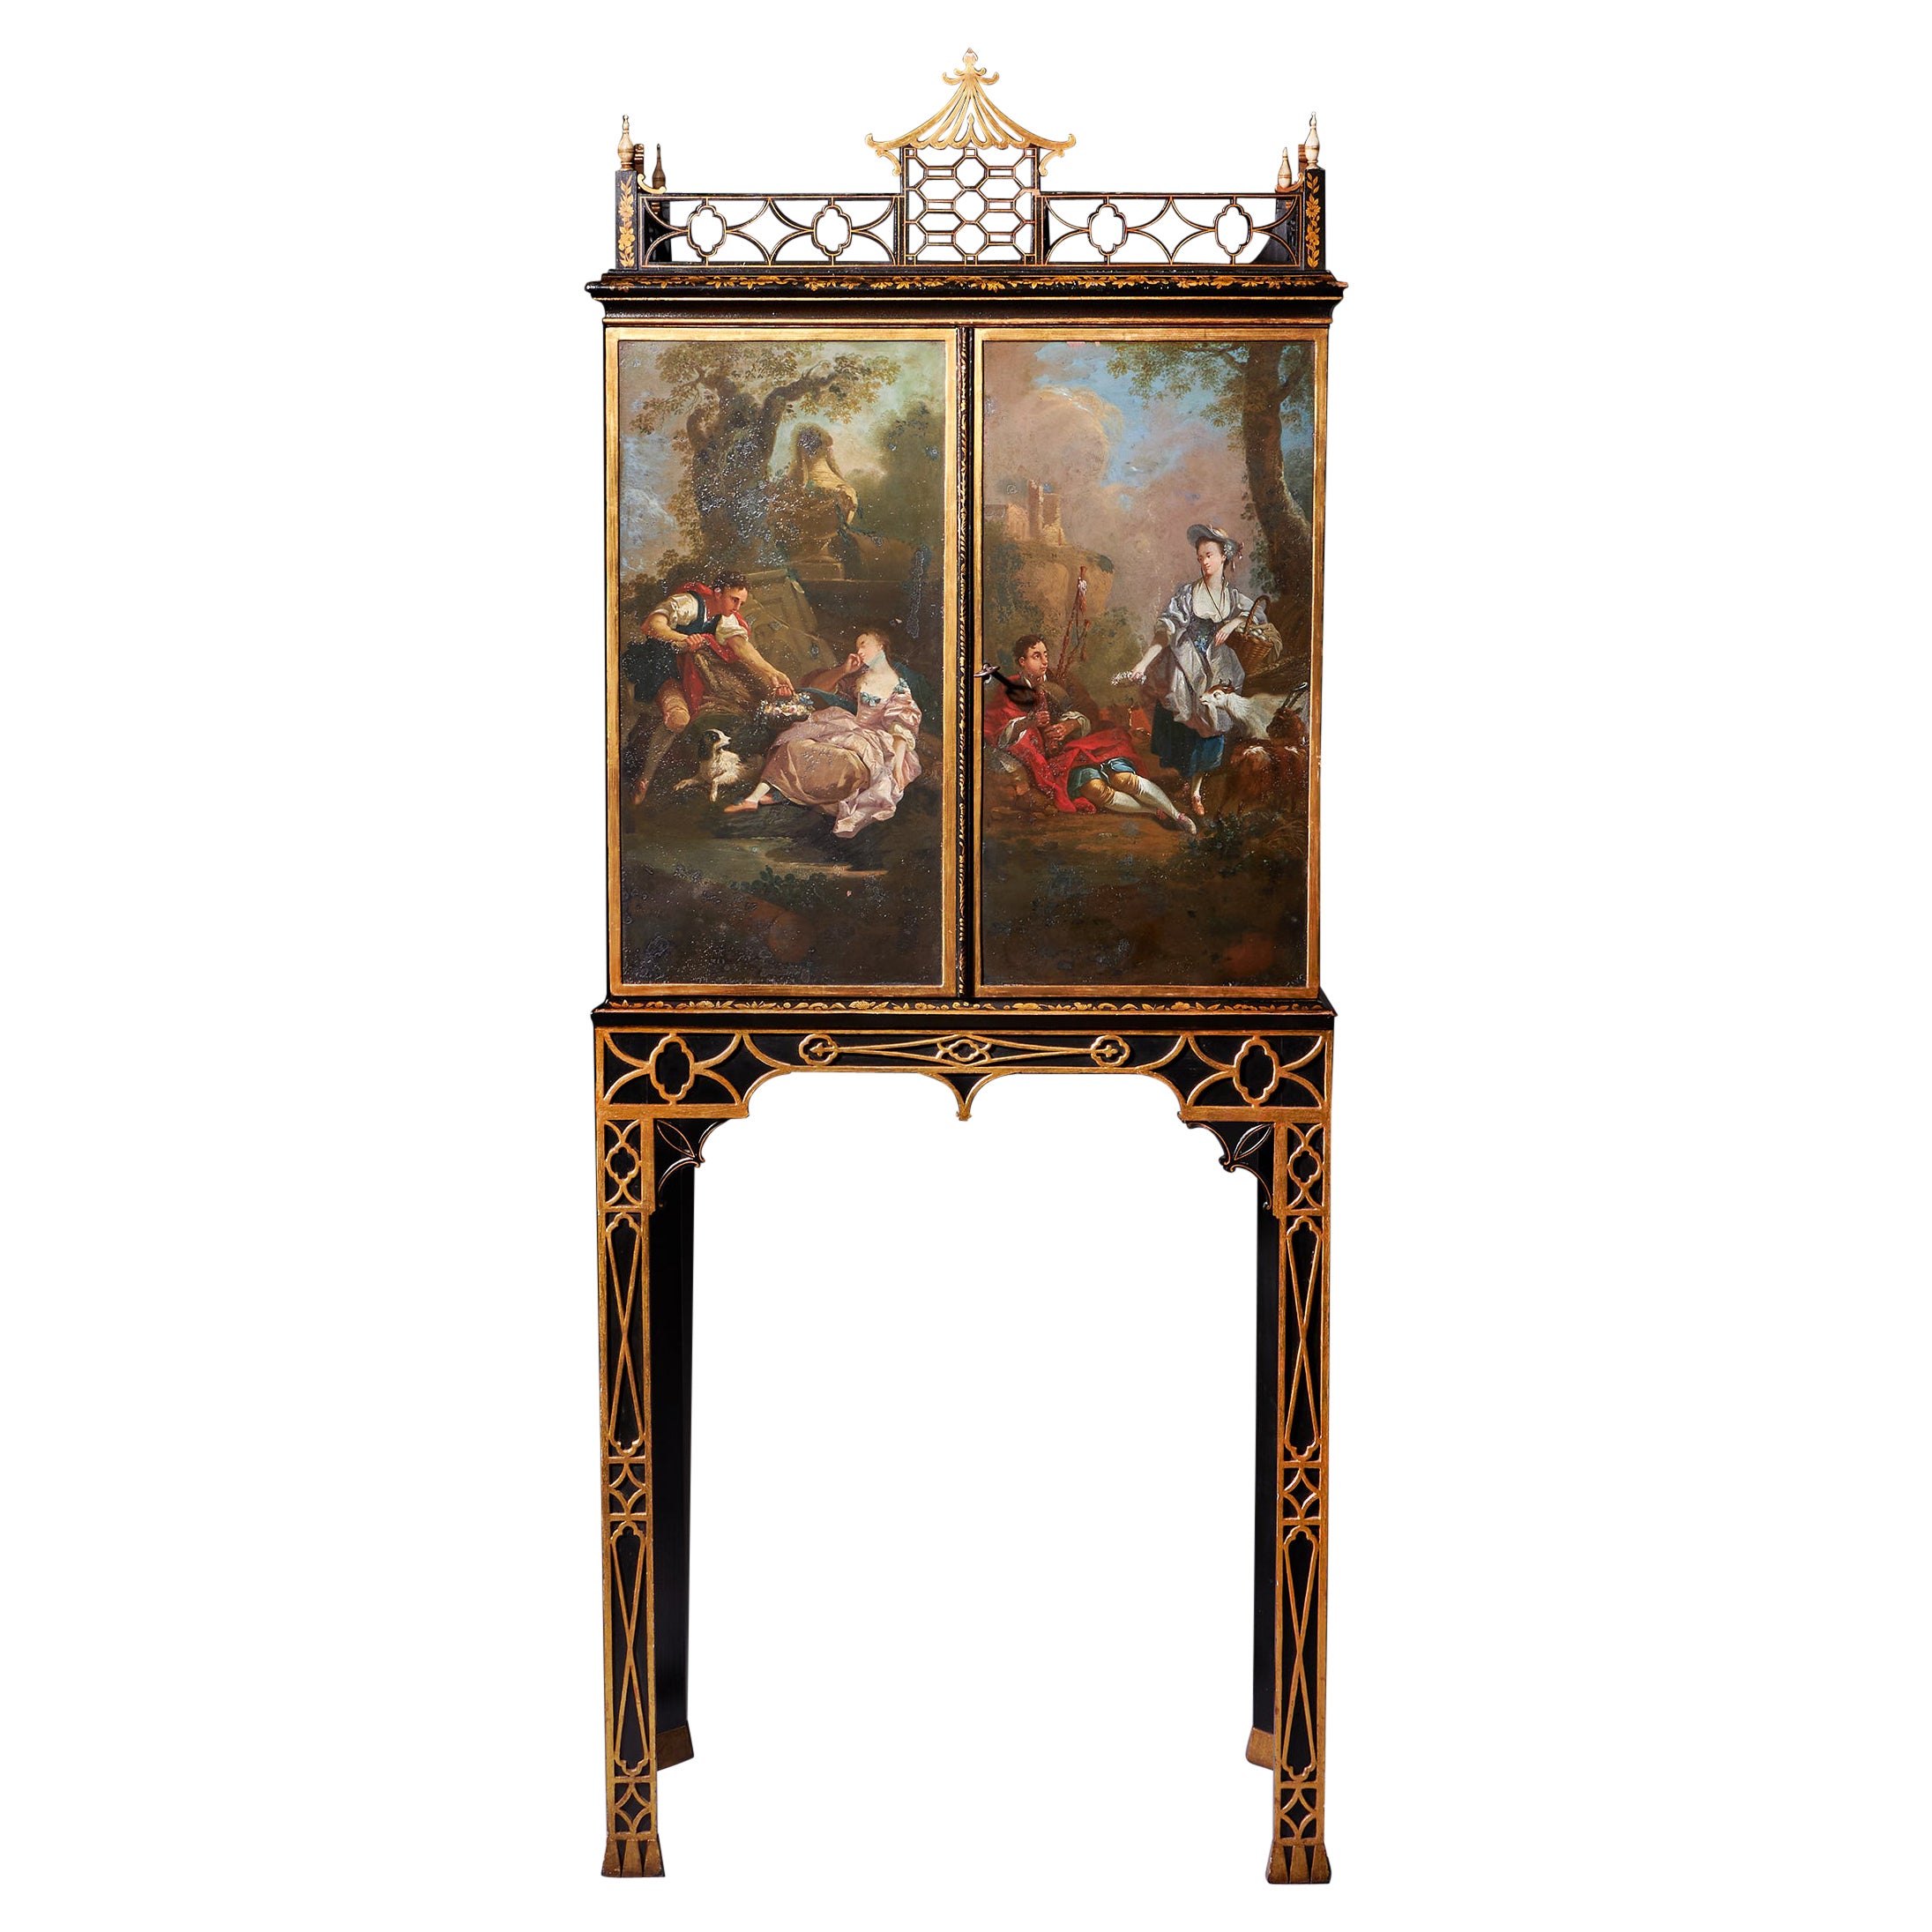 Rare cabinet chinois Chippendale George III sur stand, vers 1760. Angleterre en vente